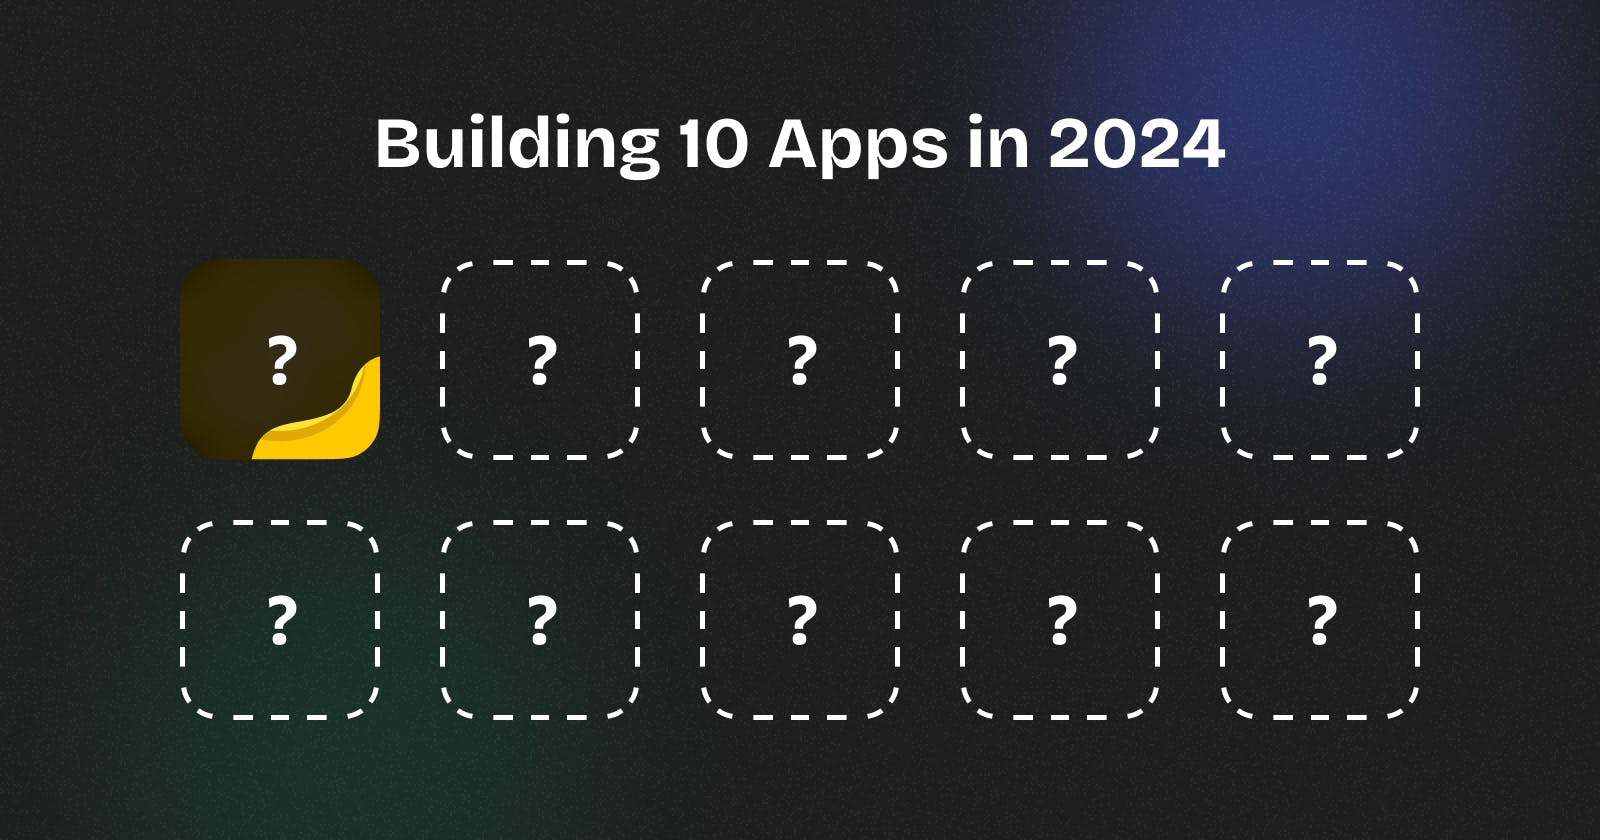 I'm building 10 apps in 2024.